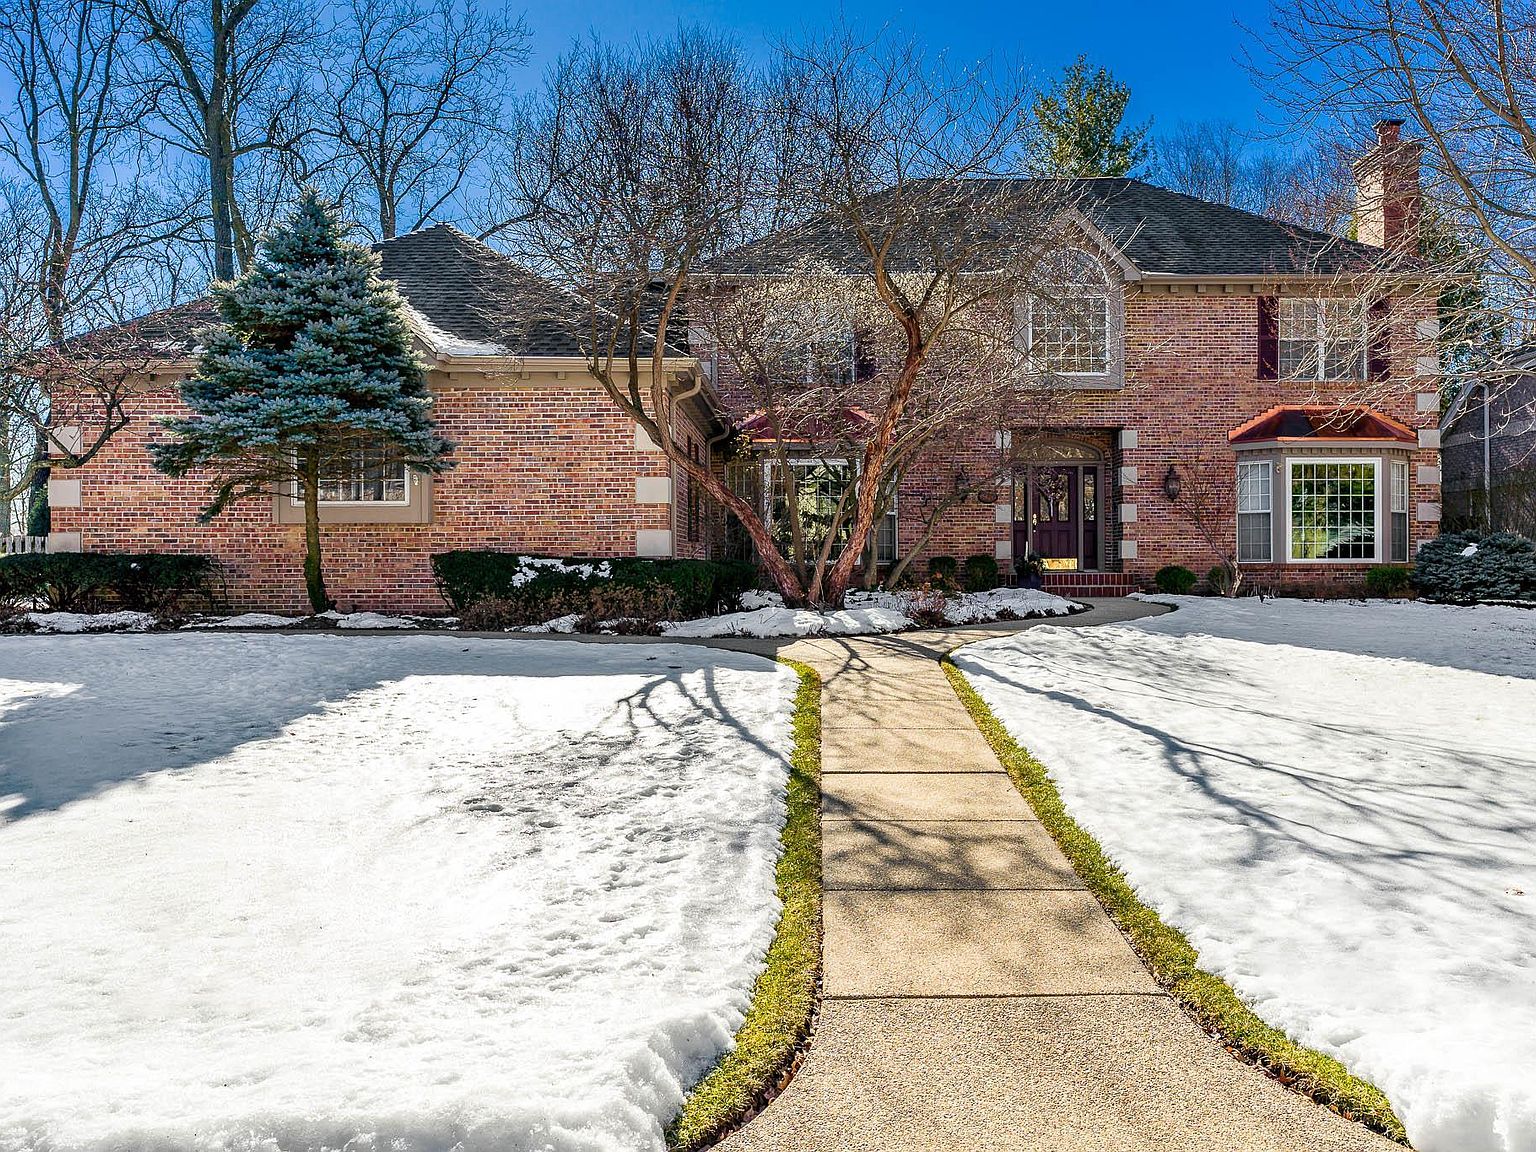 6421 Burberry Dr, Rockford, IL 61114 | Zillow